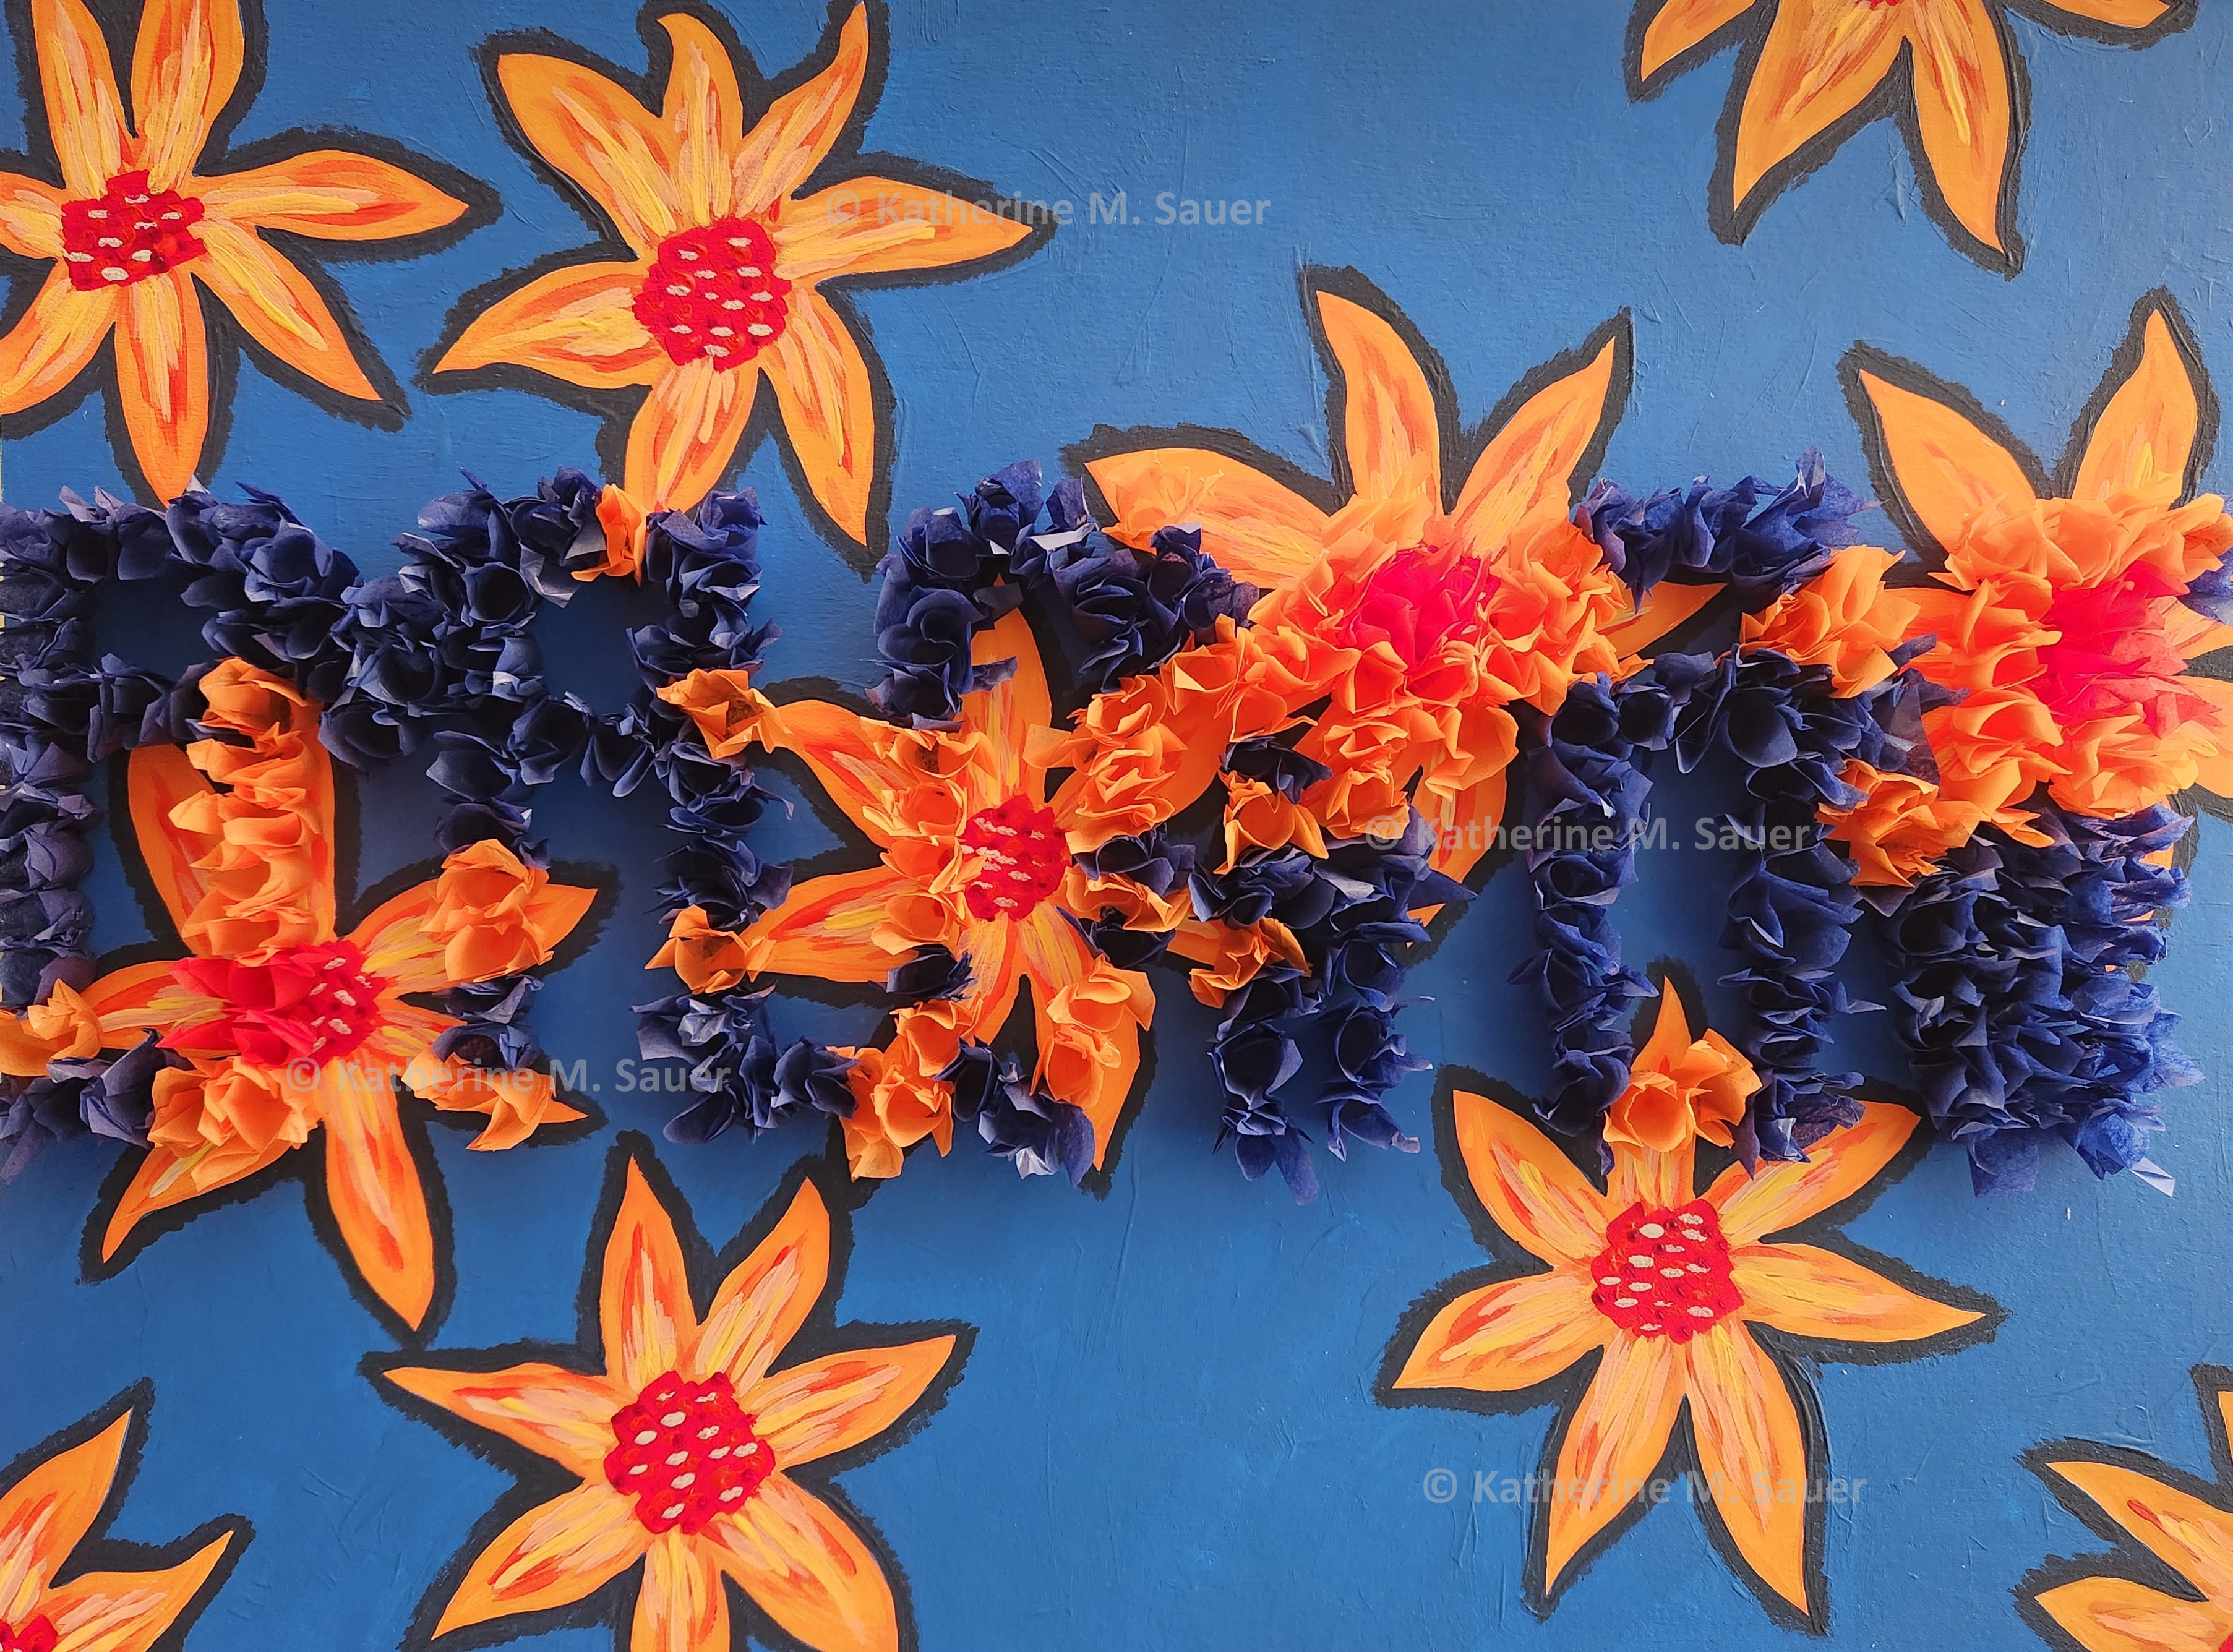 a painting of star-like orange flowers on a blue background with the word 'employment' created using tissue paper